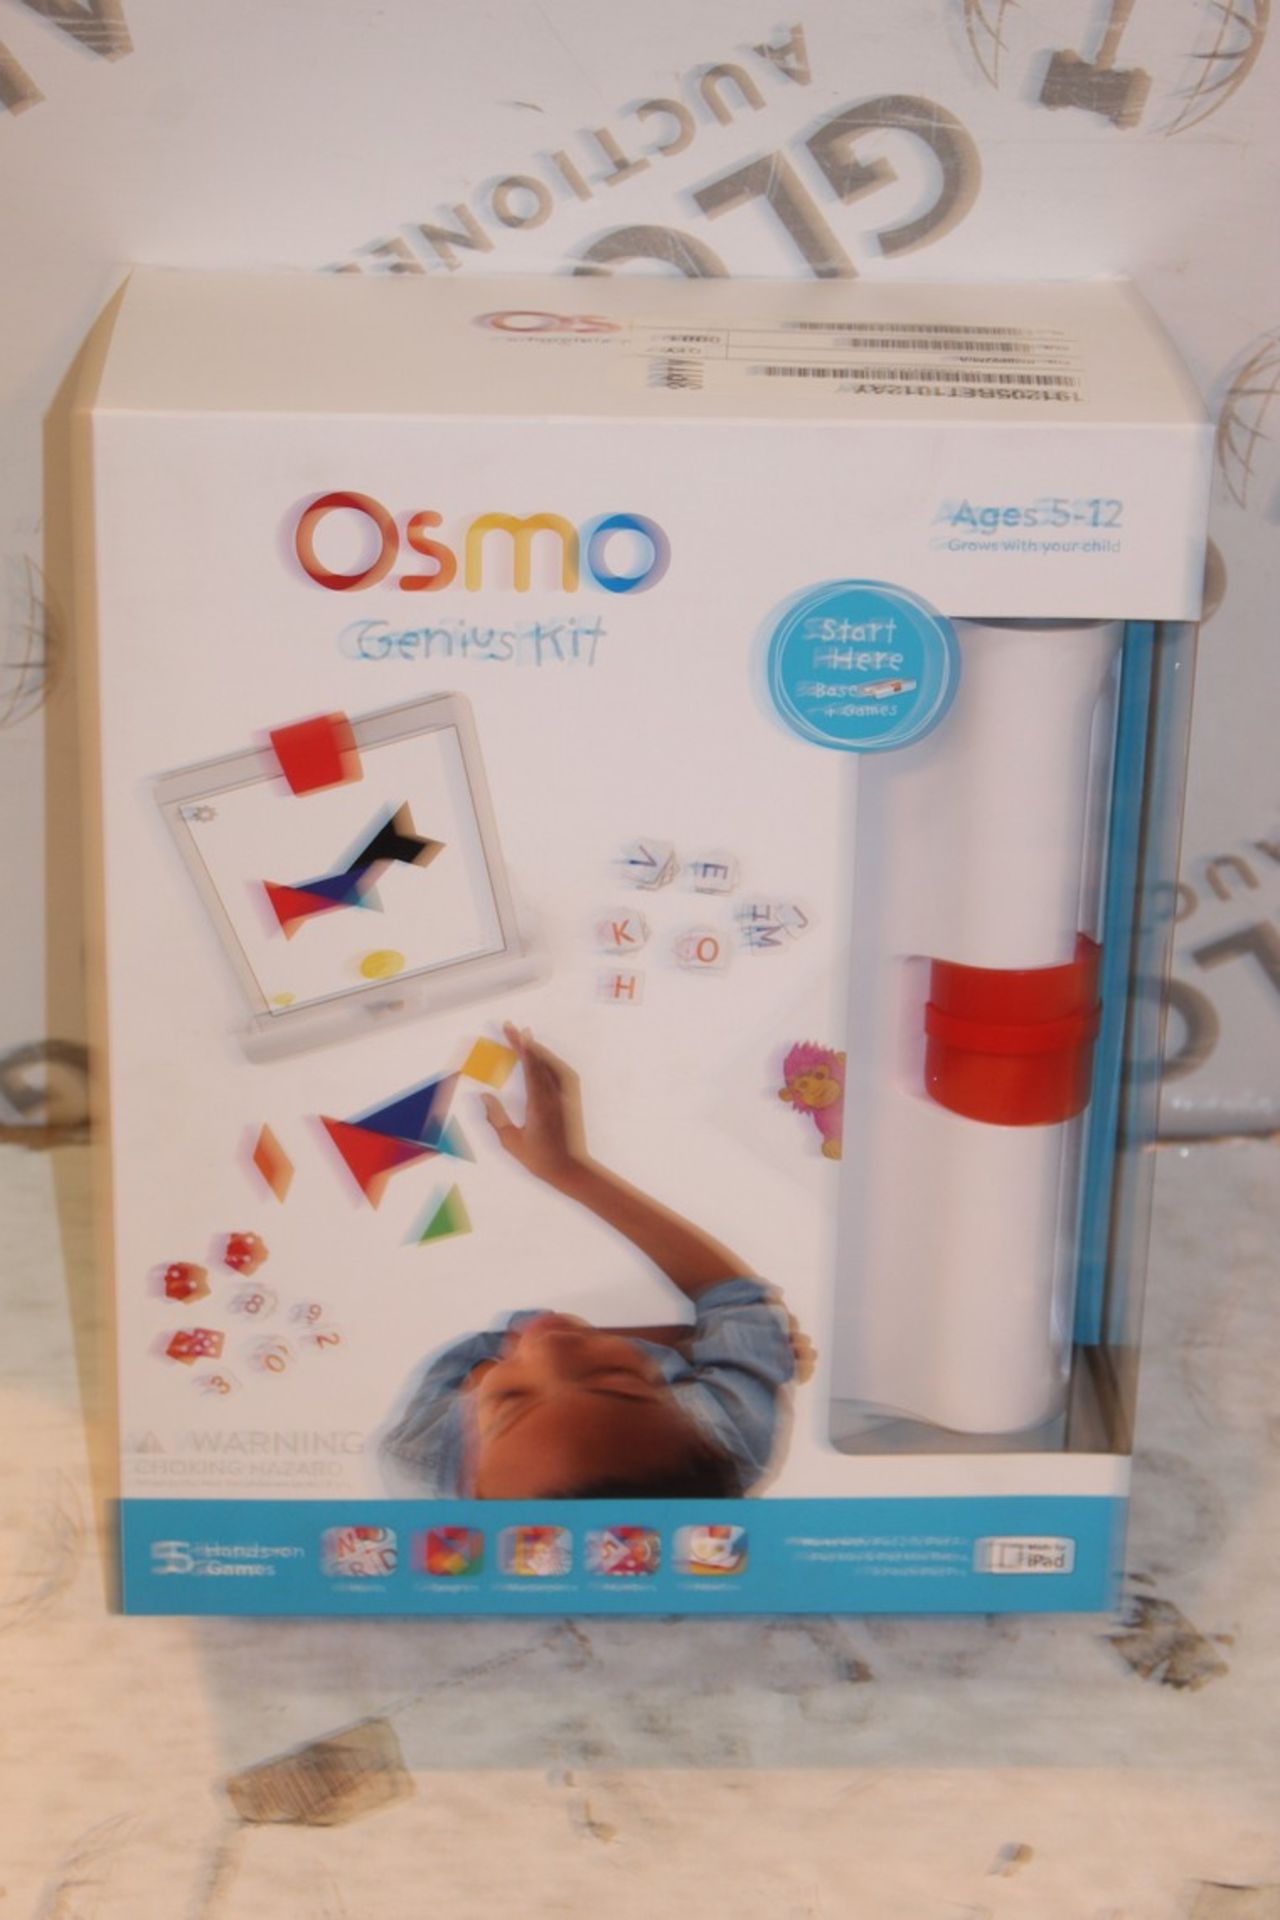 Boxed Osmo Genius Ages 5-12 Hands On Gaming Grip Kit RRP £120 (Appraisals Available On Request)